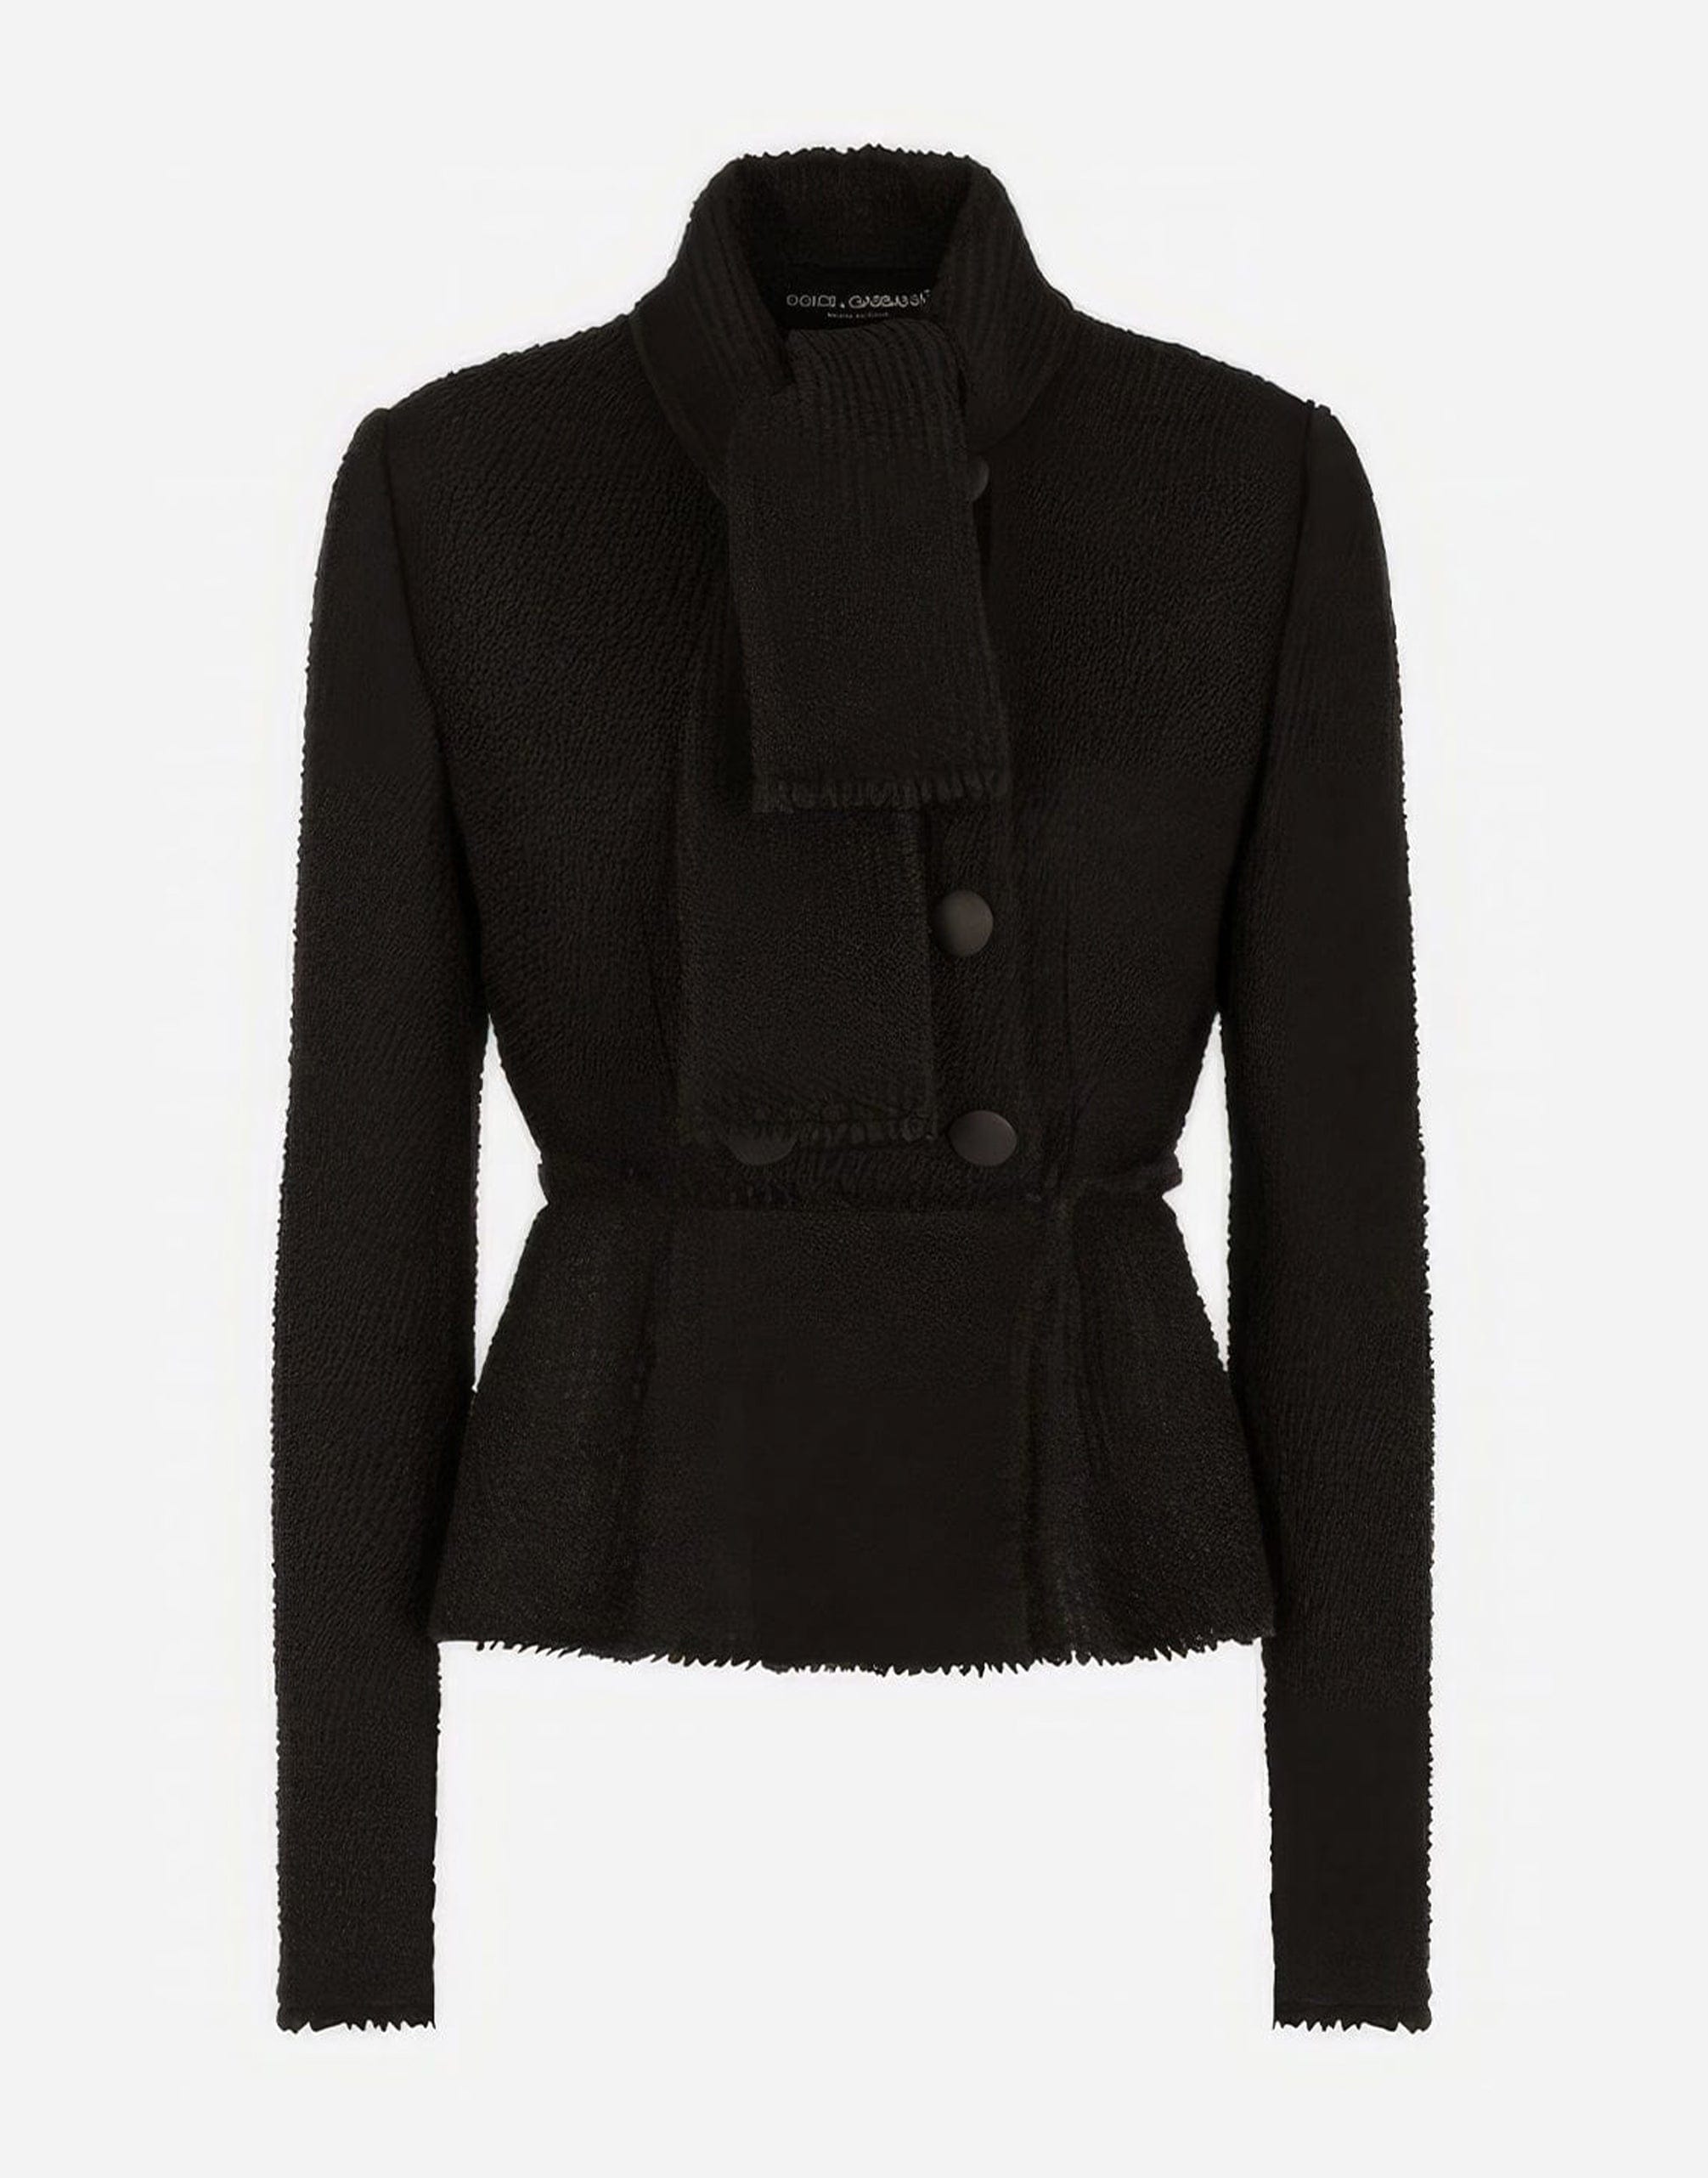 Dolce & Gabbana Double-Breasted Knit Jacket